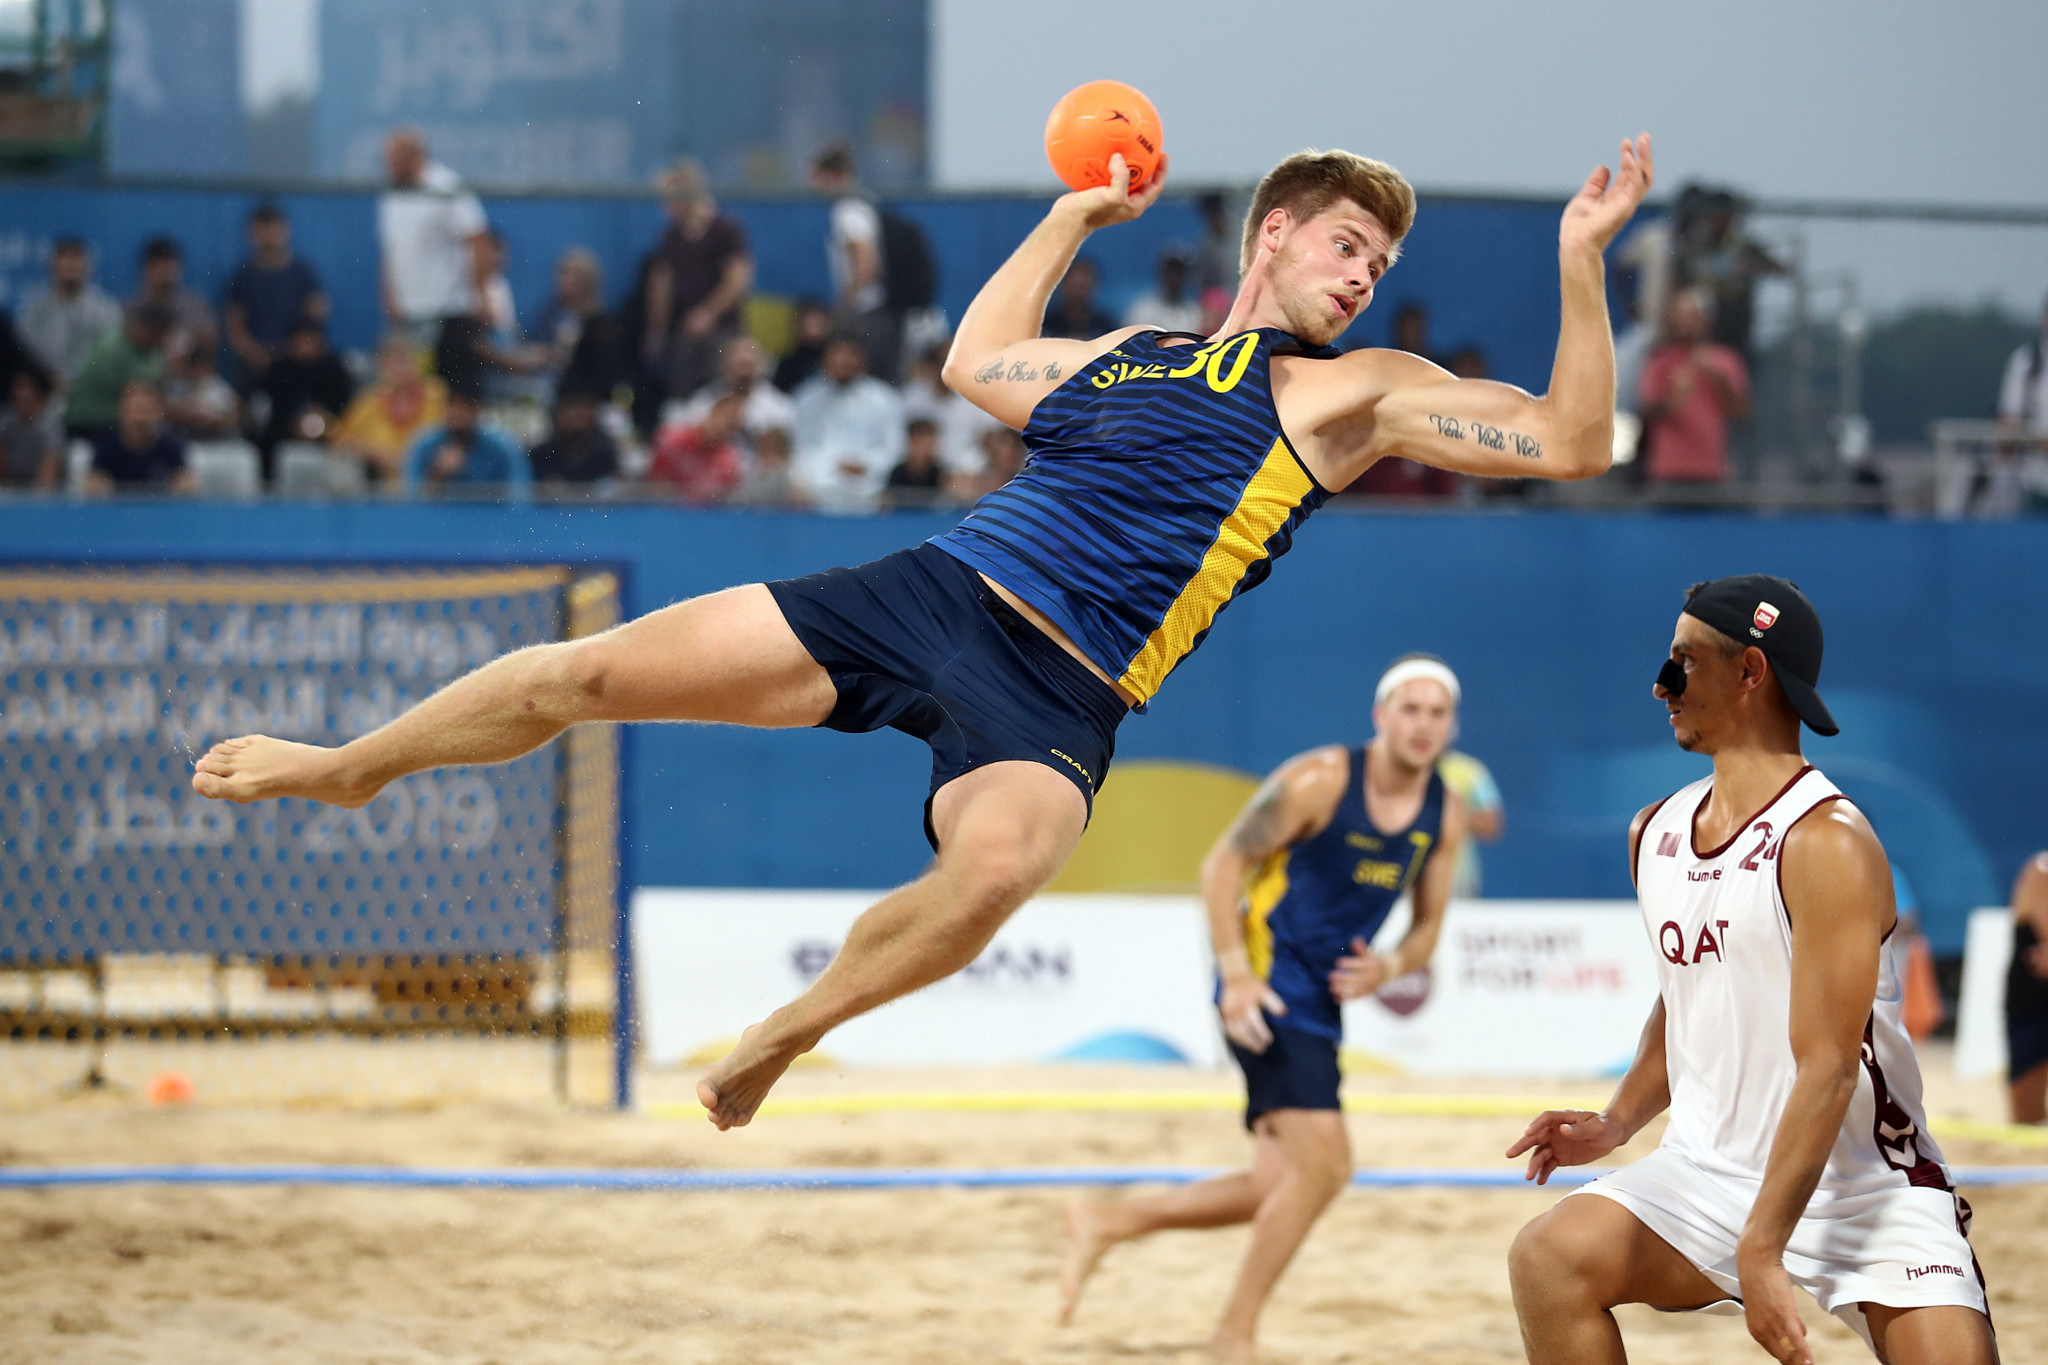 A total of 12 men's and 12 women's teams competed in the beach handball tournament at the 2019 ANOC World Beach Games ©Getty Images